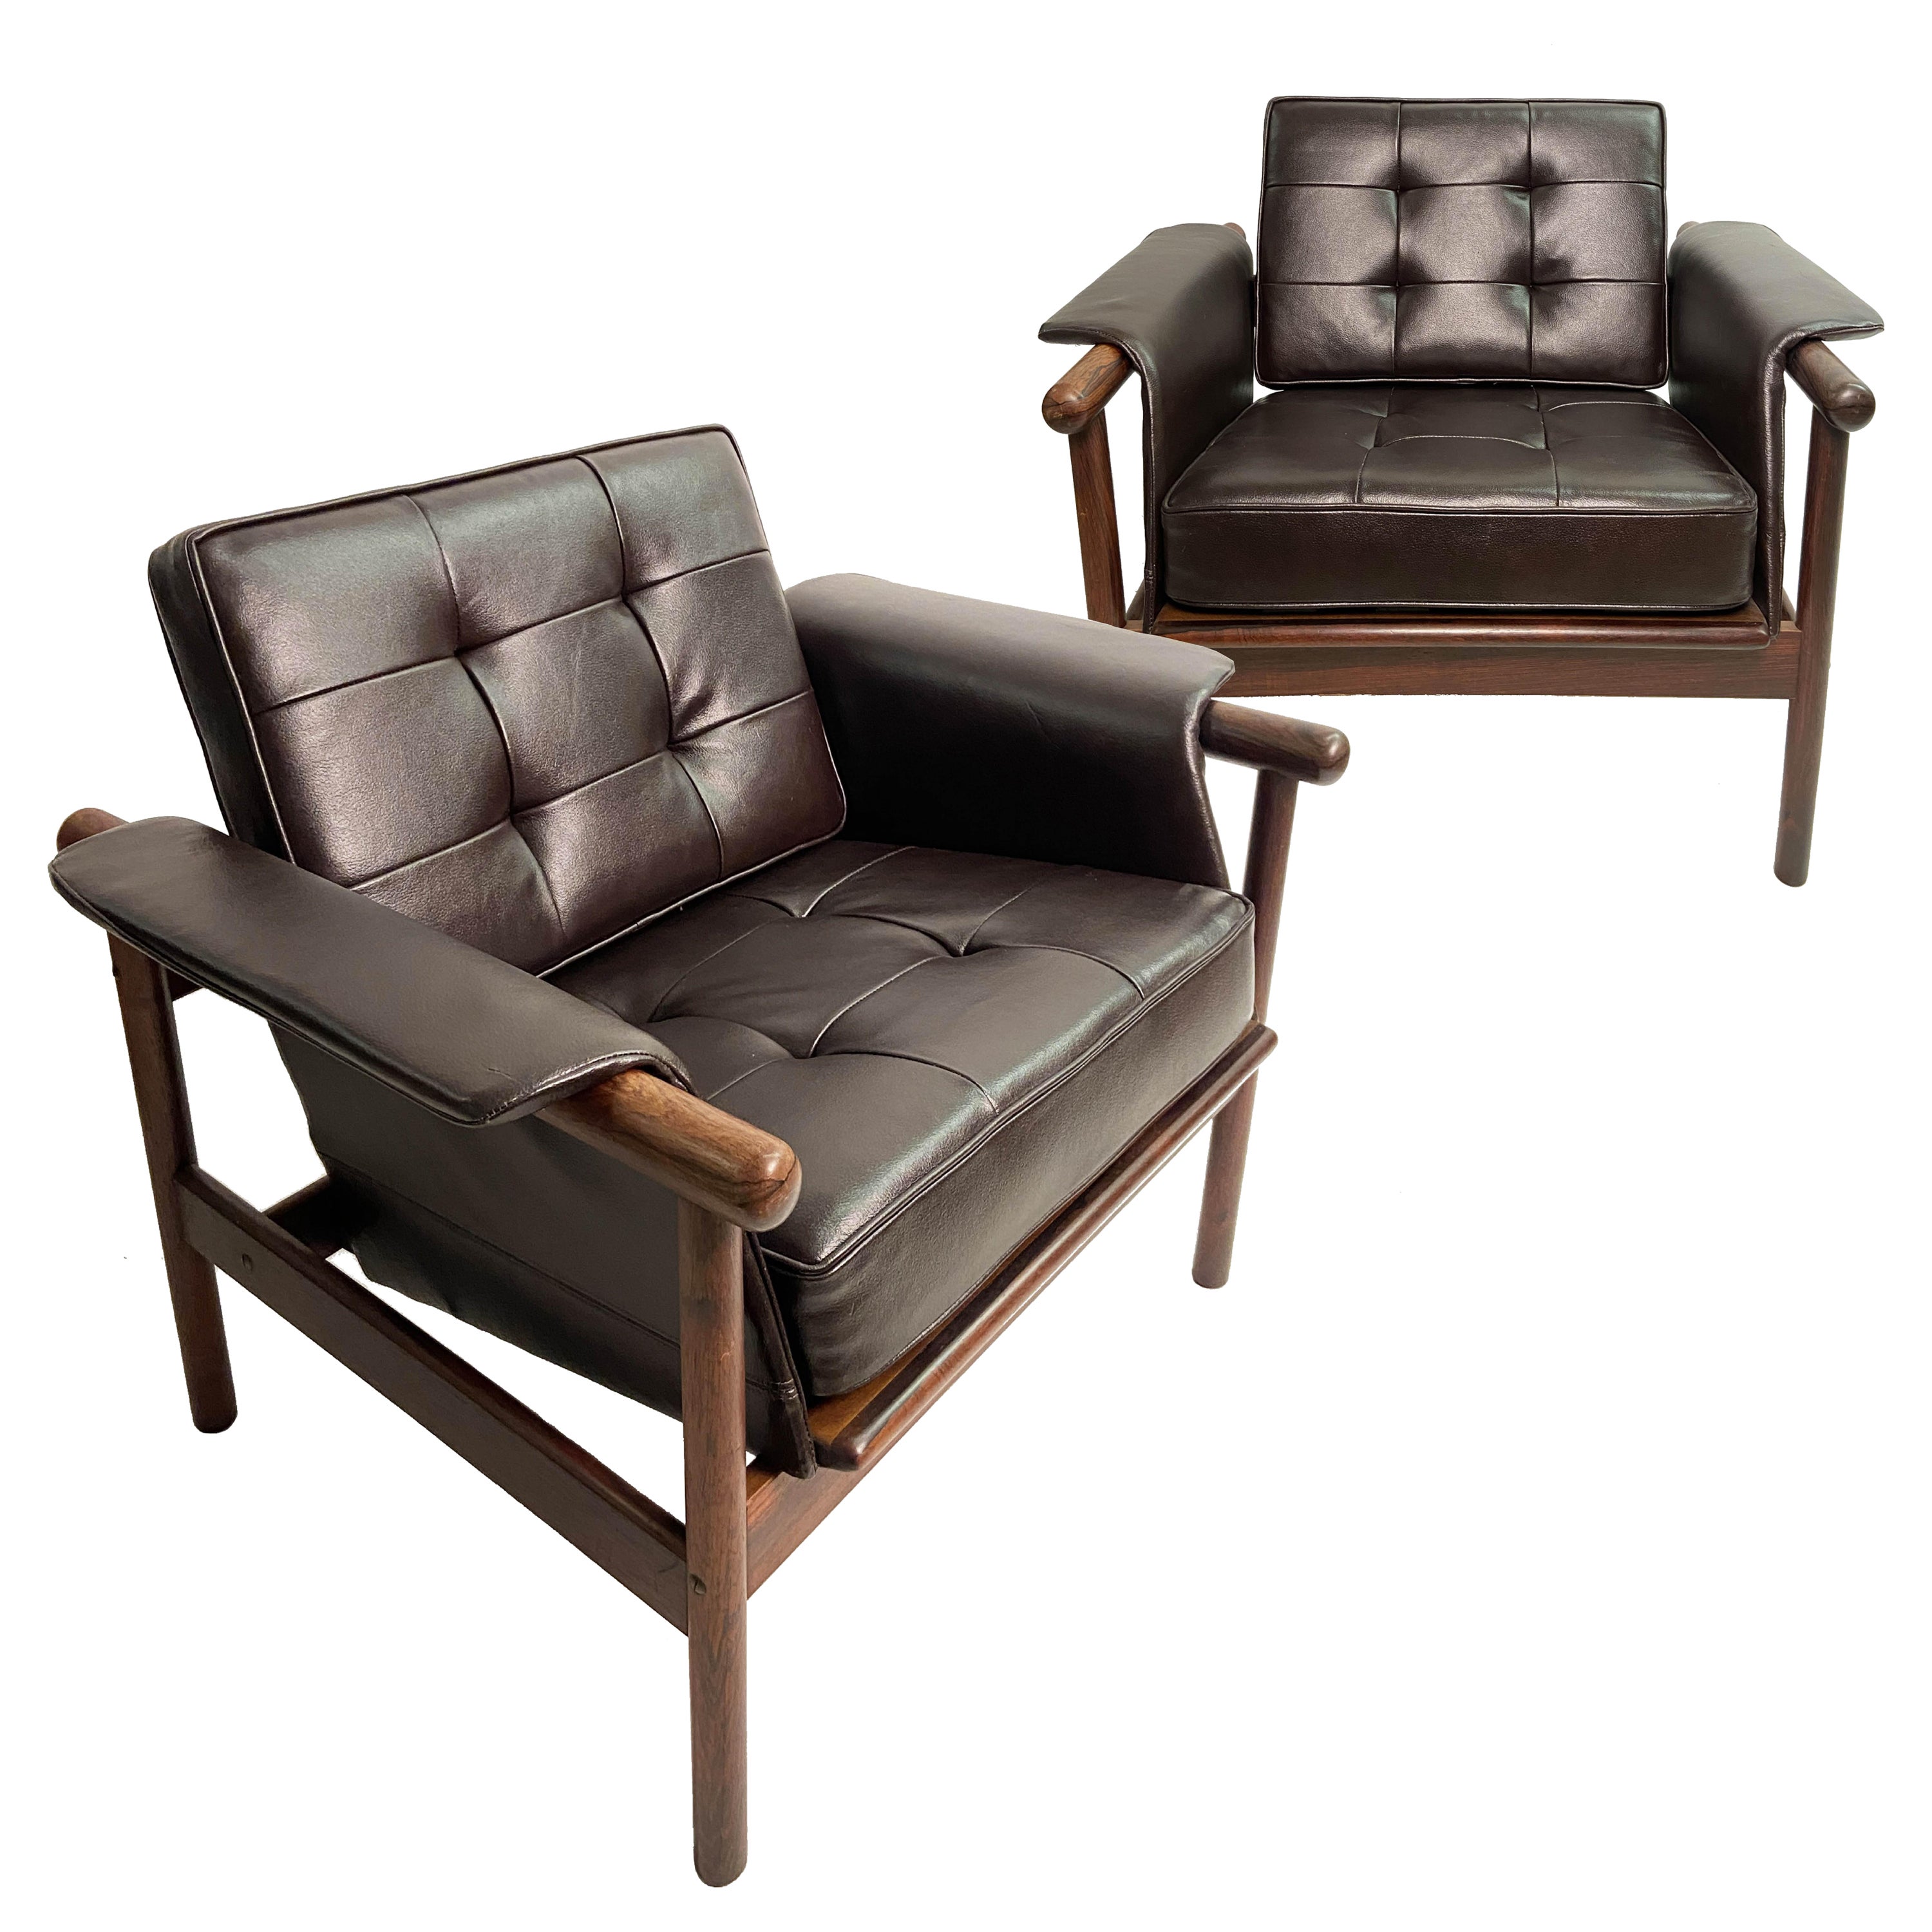 Illum Wikkelsø 'Wiki' Lounge Chairs in Rosewood and Espresso Leather, Pair For Sale